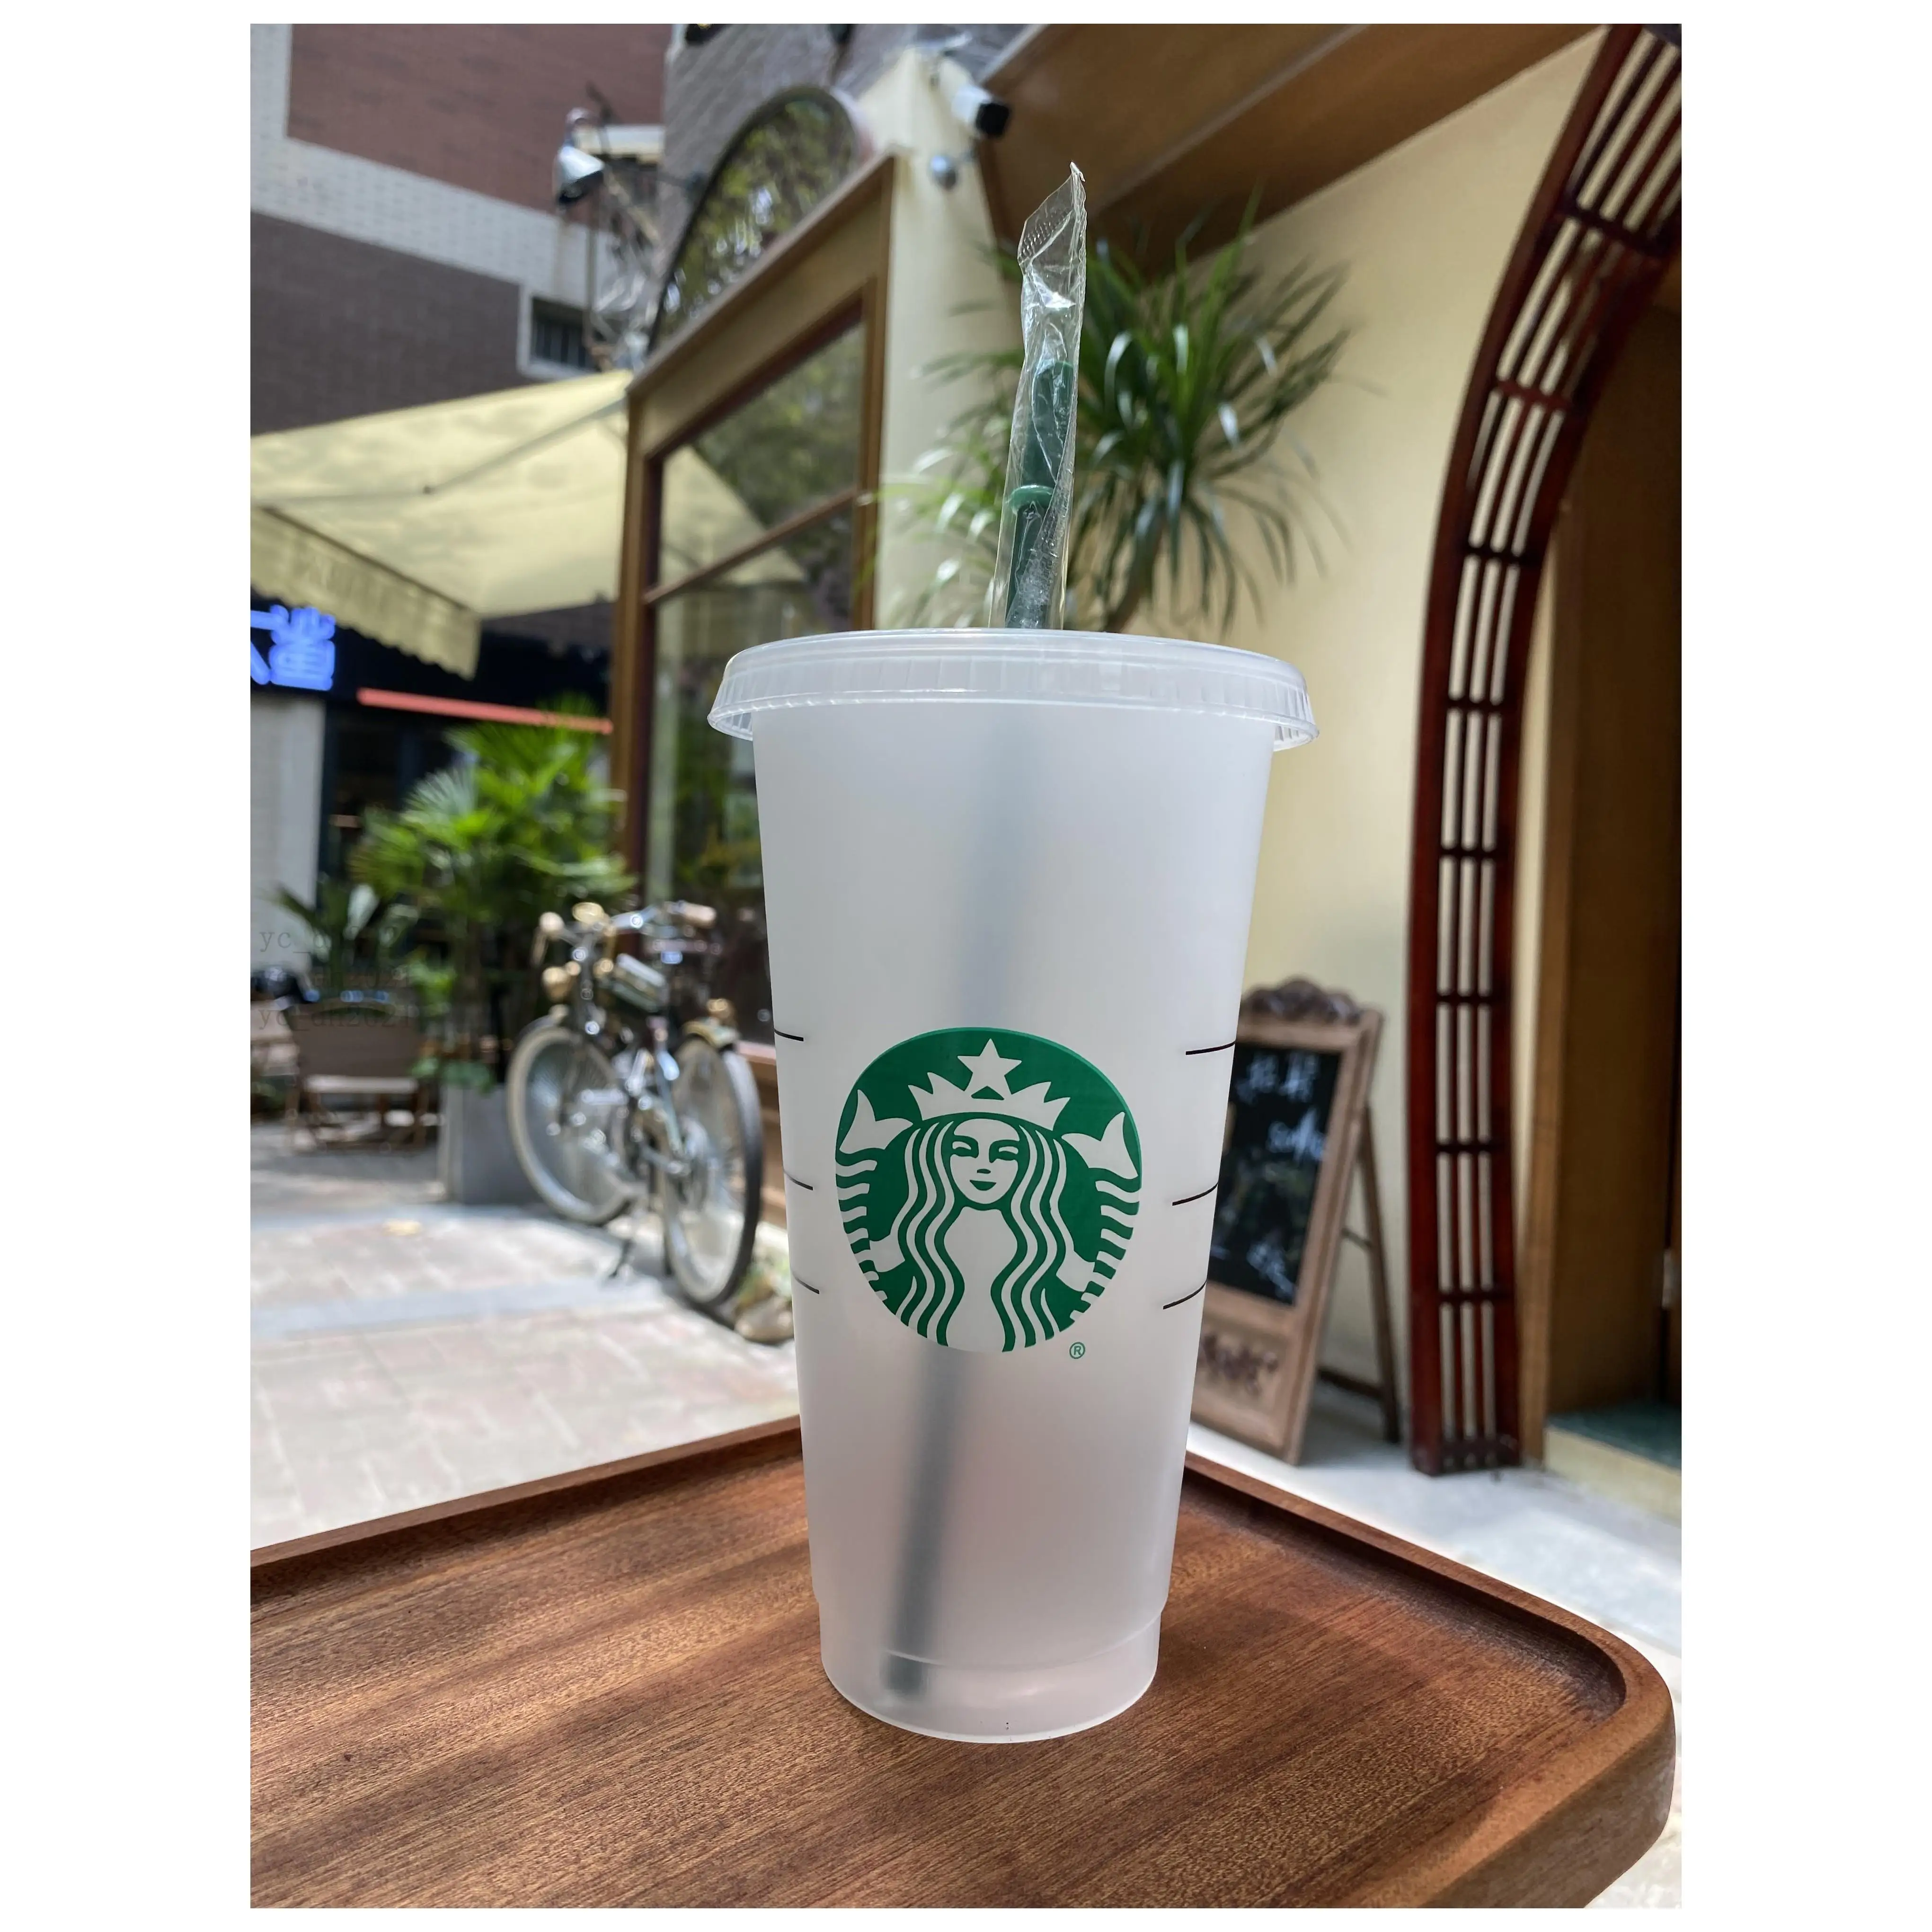 

24Oz Starbucks Transparent Plastic Cup Juice Cup That Do Not Change Color Reusable Beverage Cups With Lids And Straws Coffe